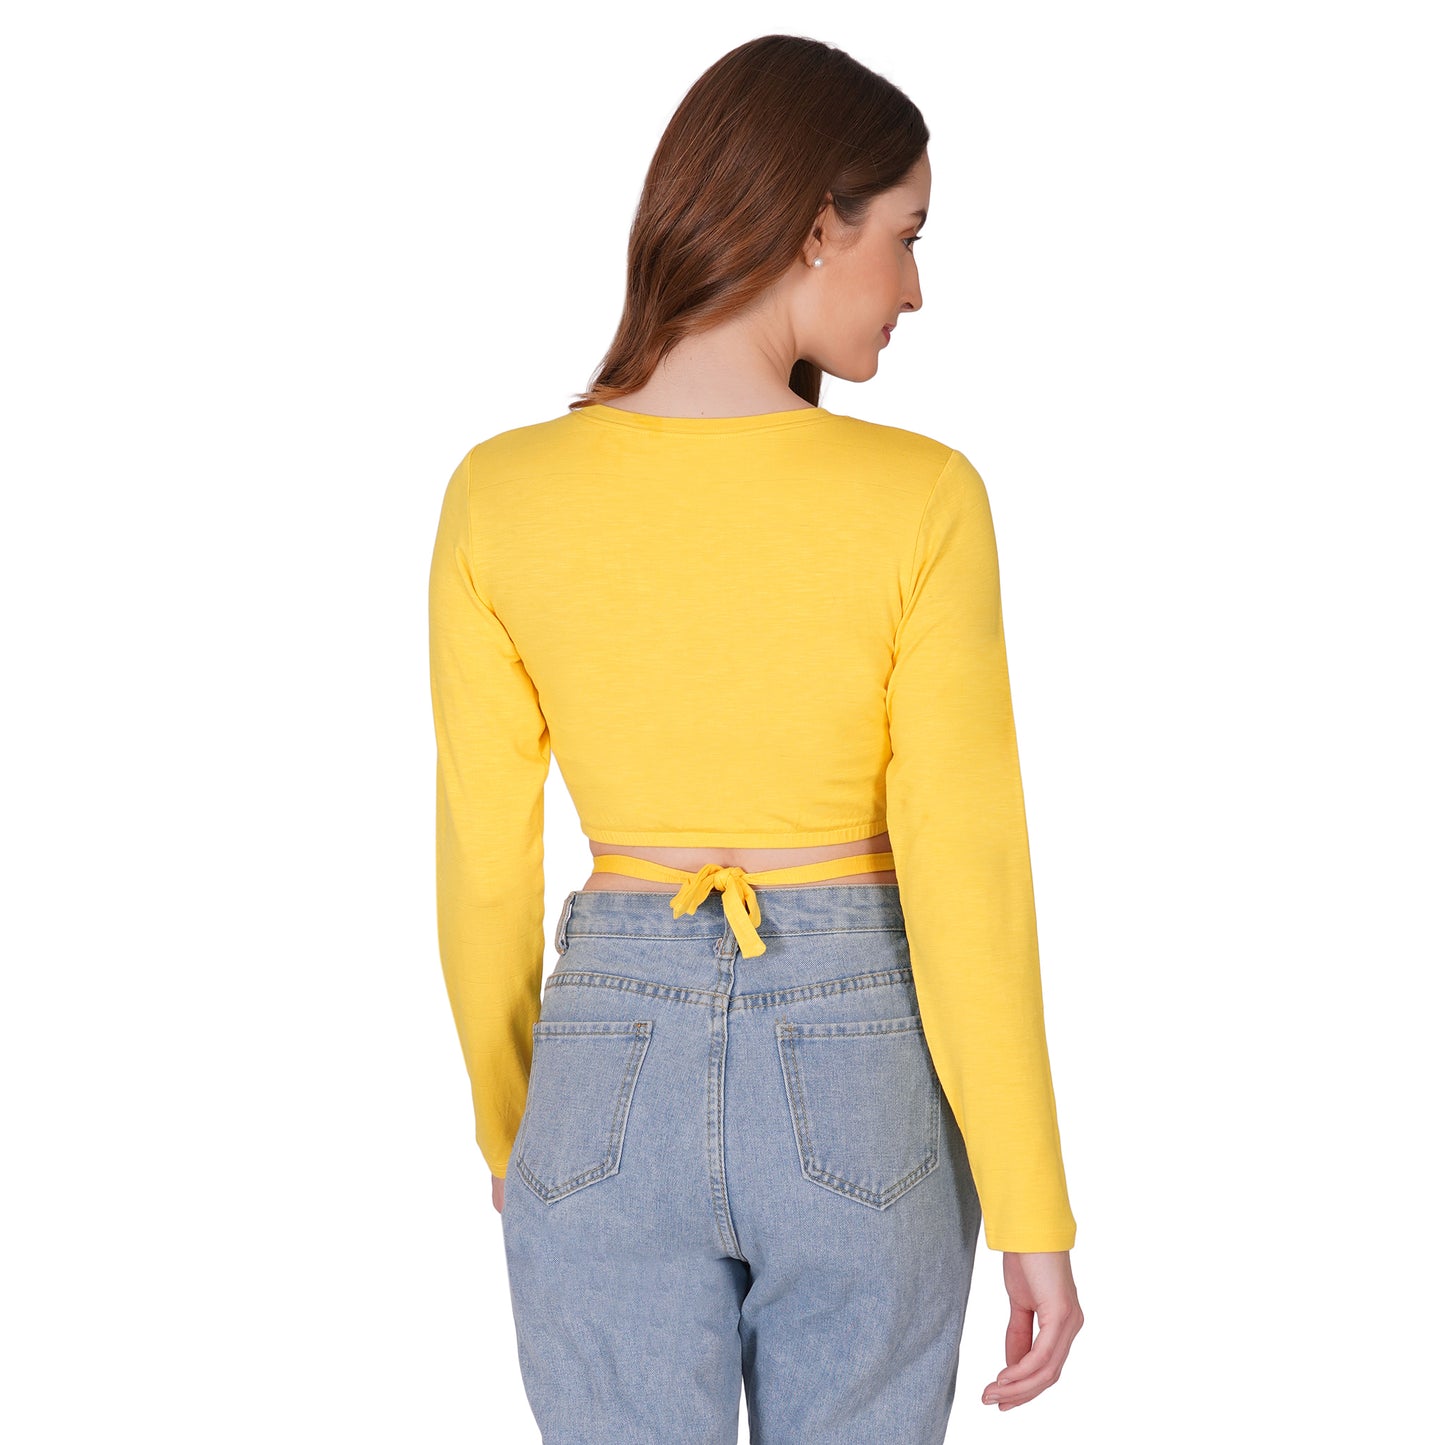 SLAY. Women's Yellow Full Sleeves Crop Top with Back Wrap around Strings-clothing-to-slay.myshopify.com-Crop Top